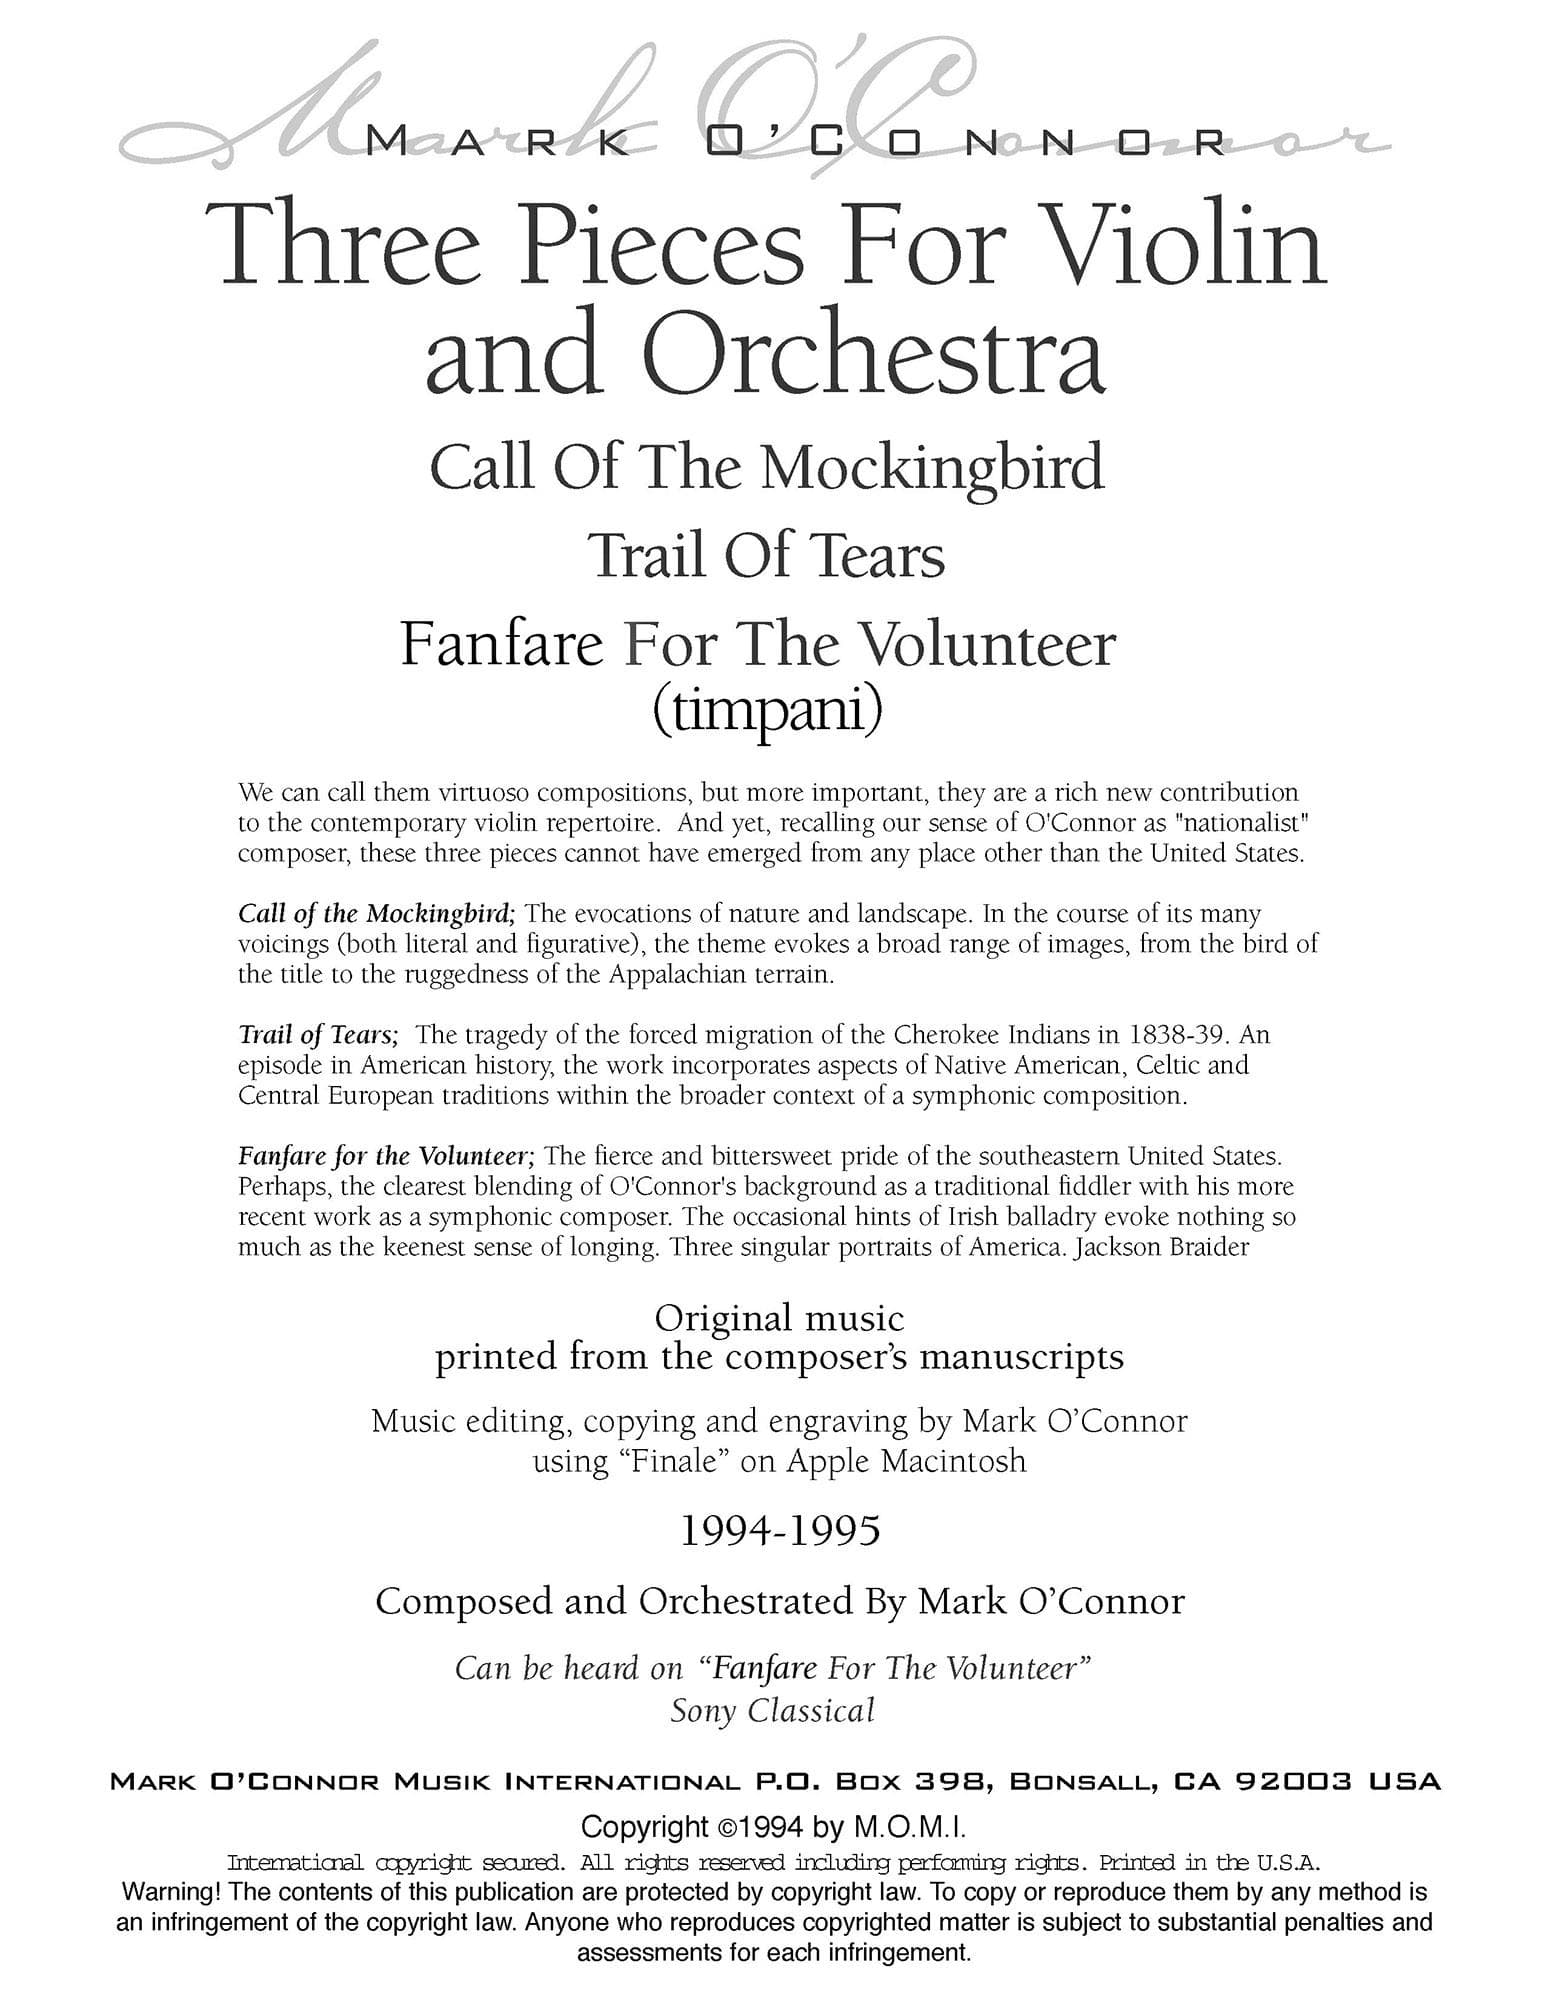 O'Connor, Mark - Three Pieces for Violin and Orchestra - Percussion - Digital Download